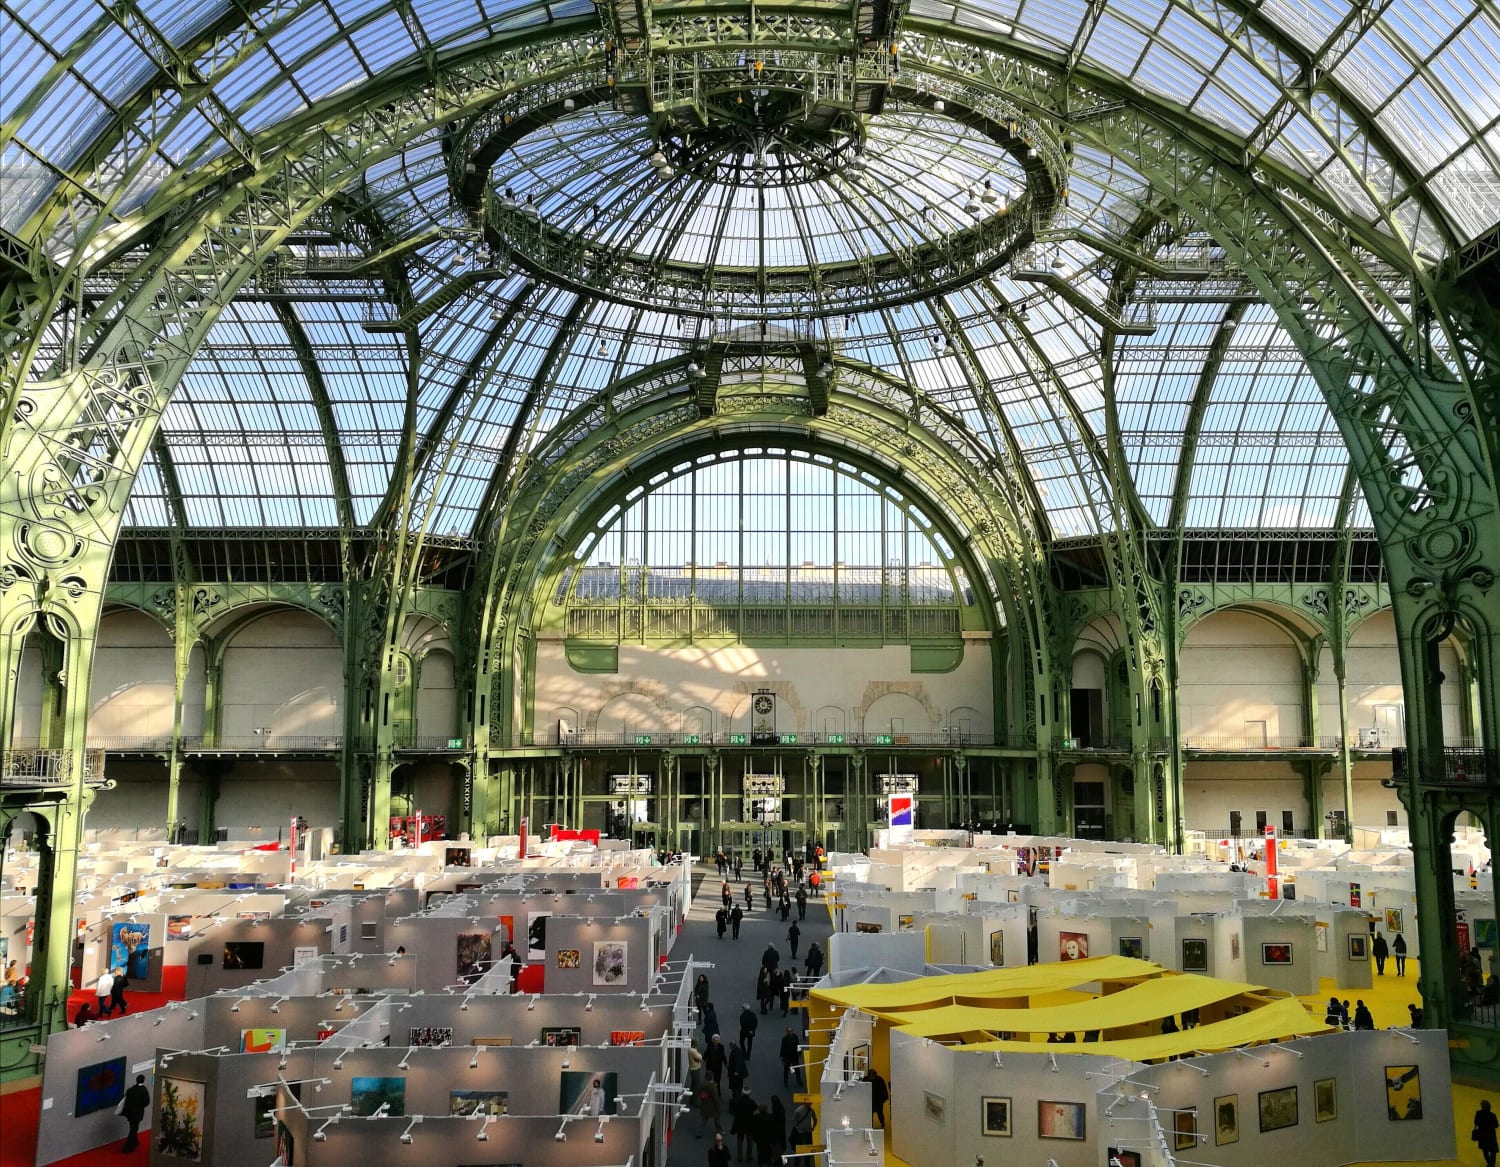 Grand Palais is so beautiful. Taking a pic of a photography exposition haha